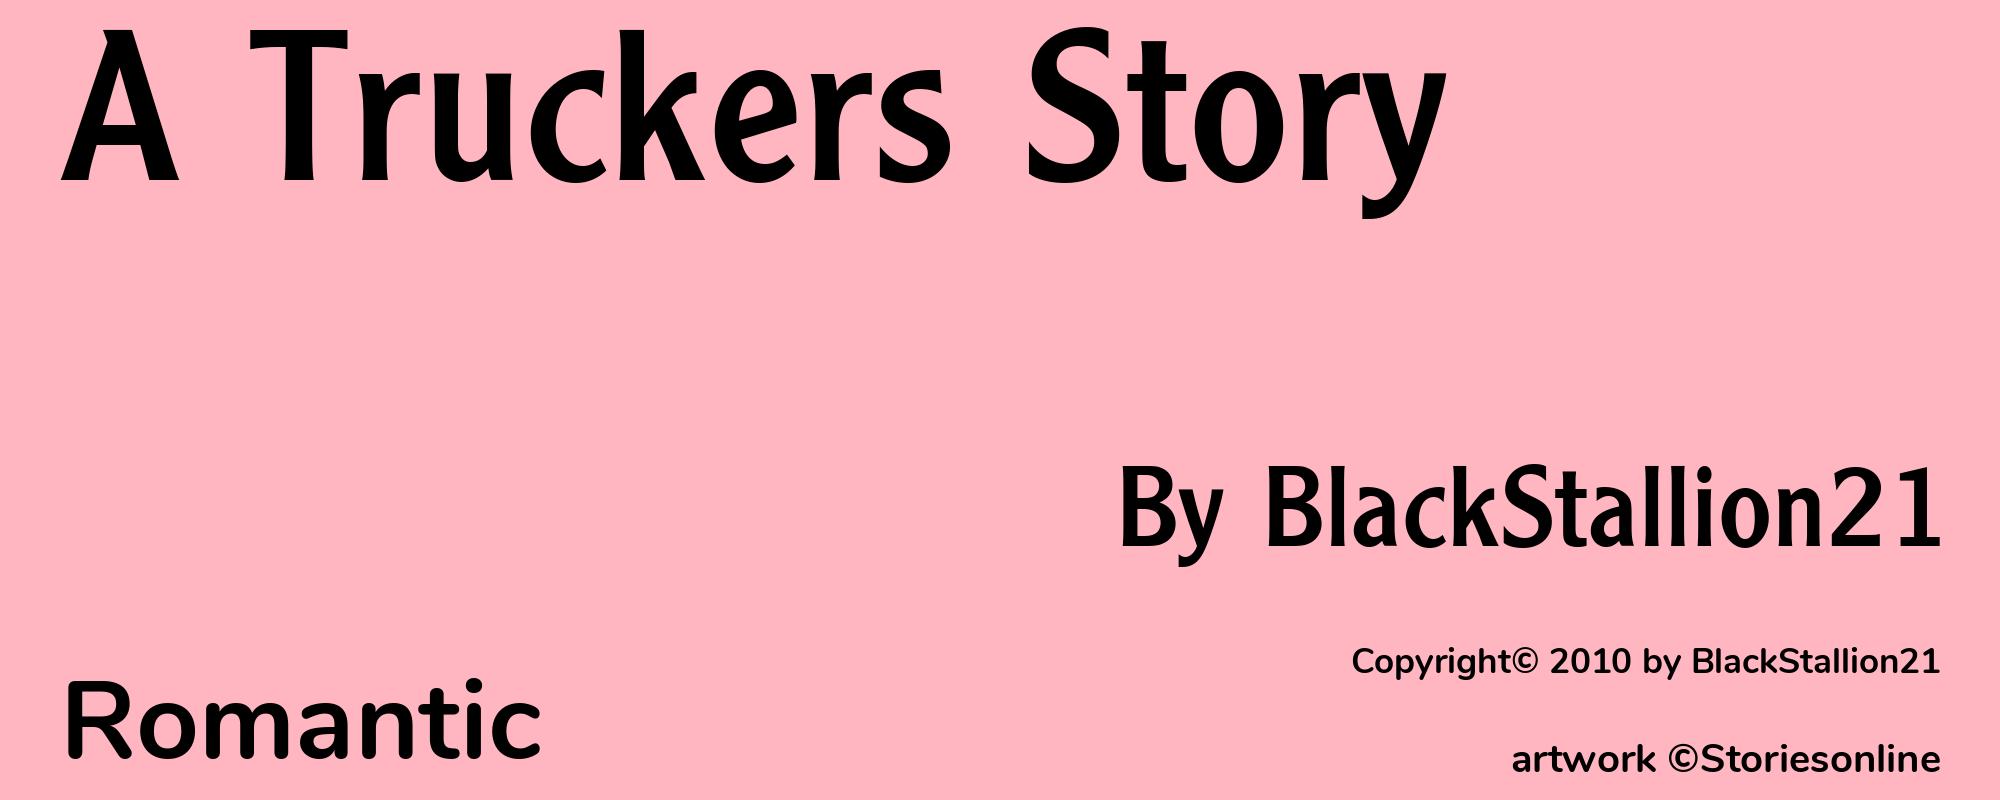 A Truckers Story - Cover